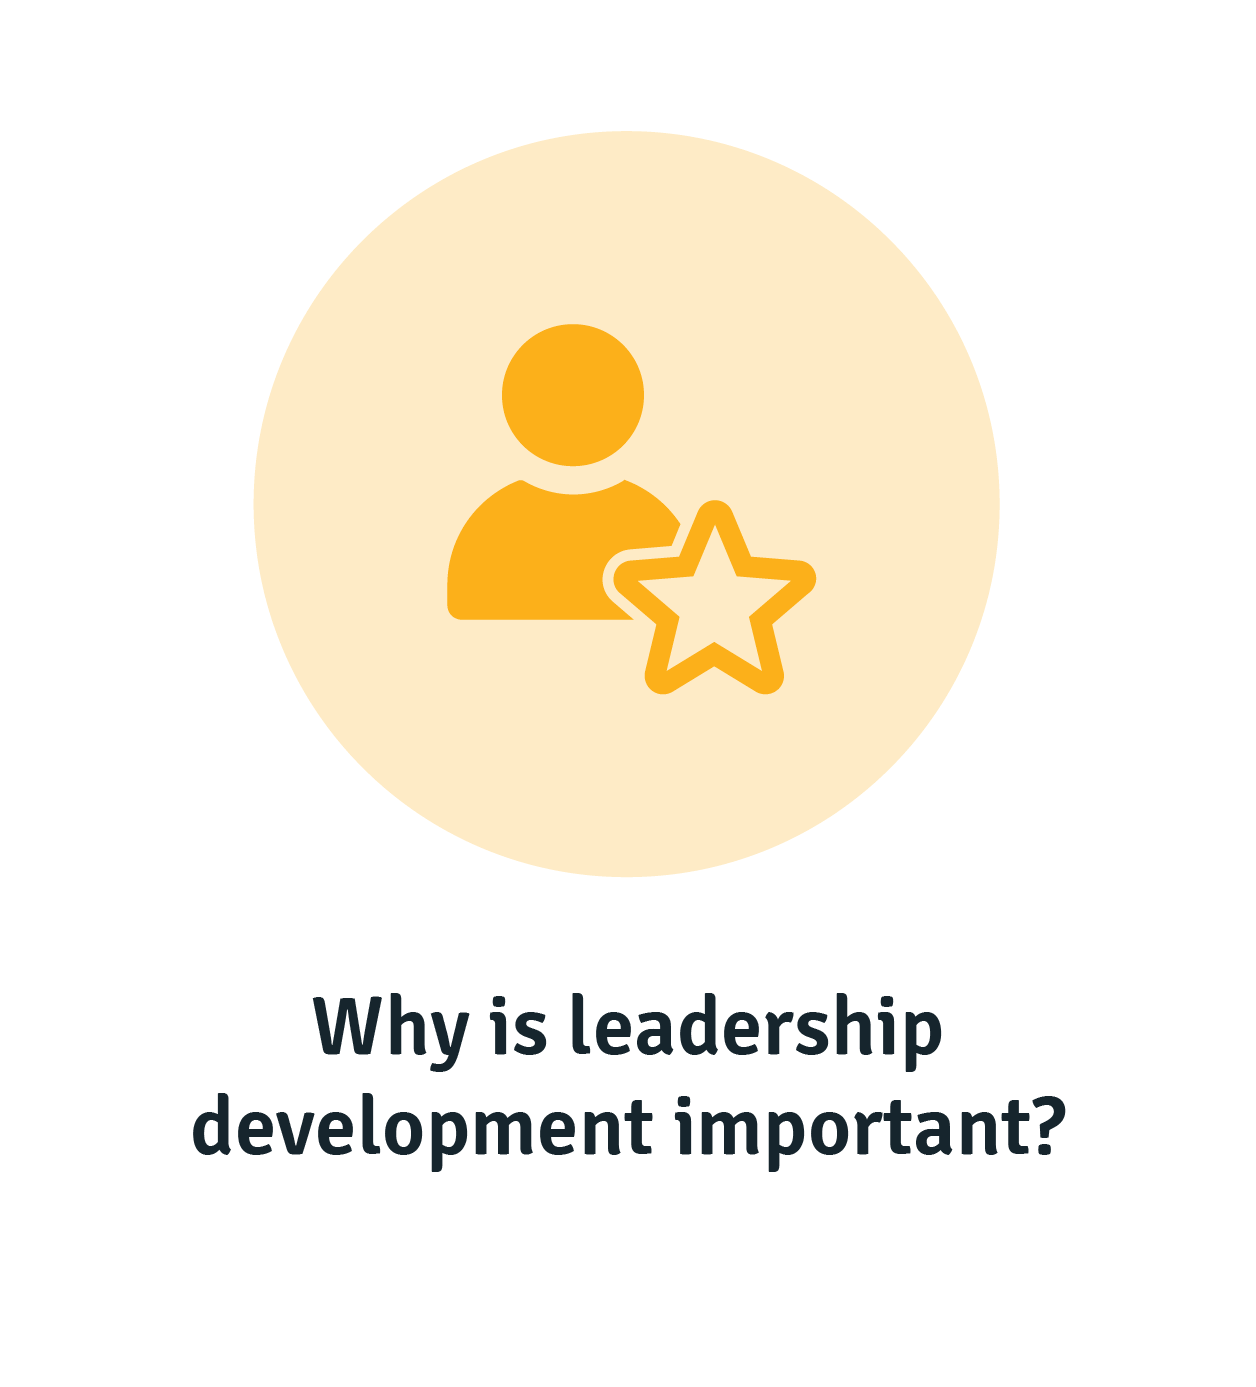 Why is leadership development important?